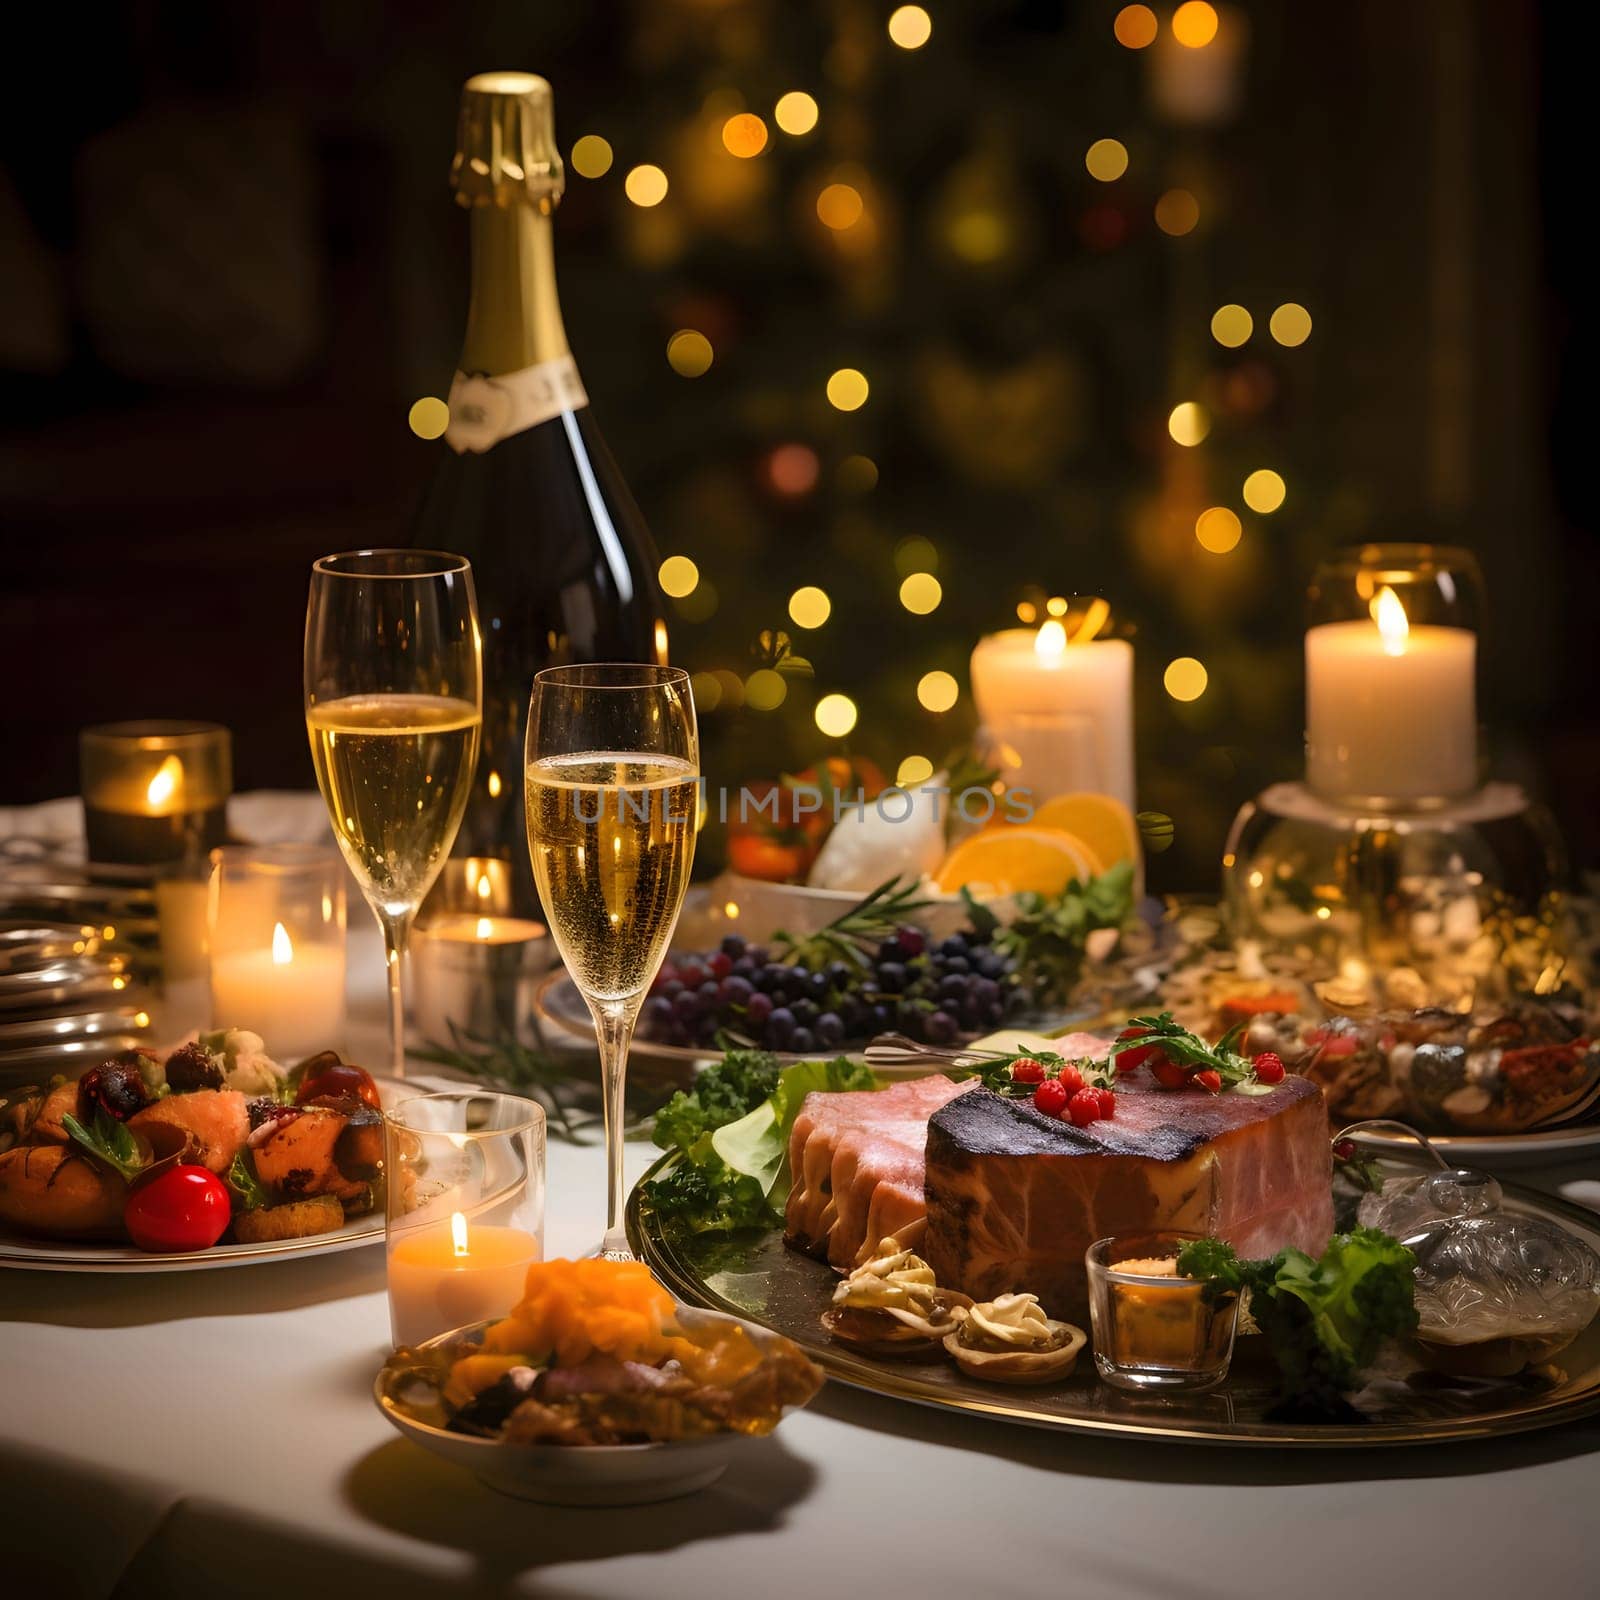 A richly set table, for a New Year's party: plates, glasses, champagne, candles, with a blurry bokeh effect in the background. New Year's celebrations. A time of celebration and resolutions.